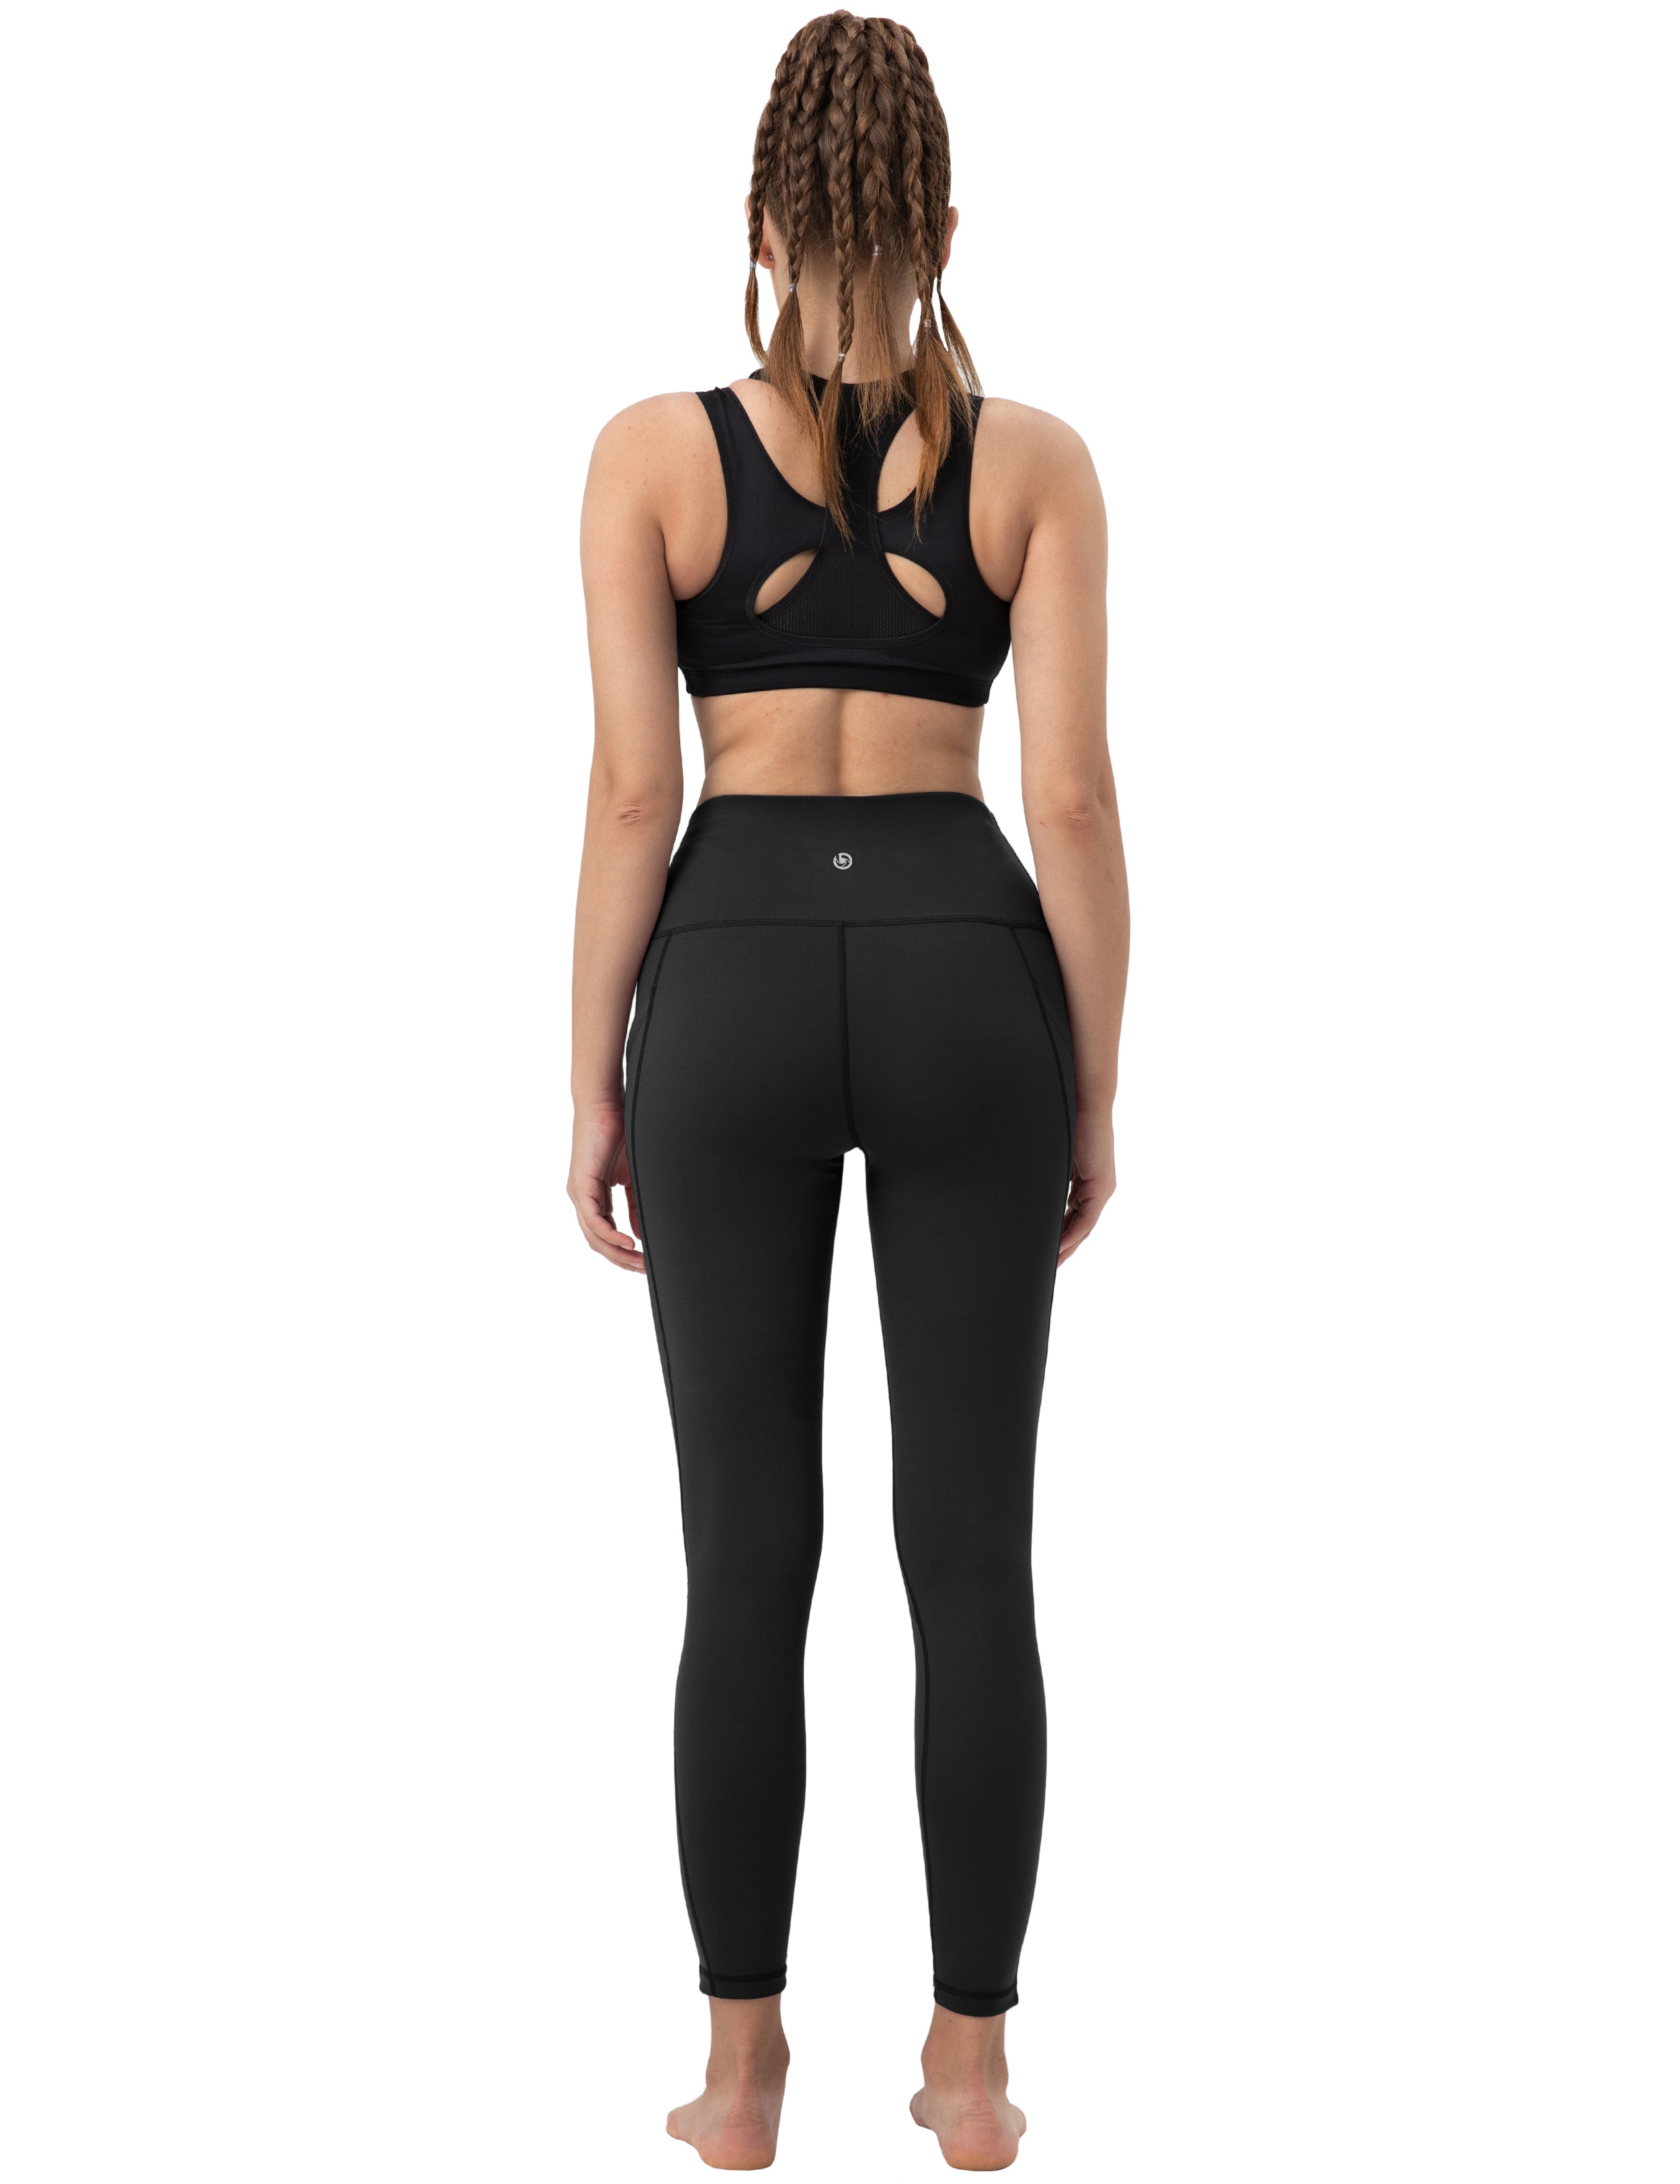 High Waist Side Pockets Pilates Pants black 75% Nylon, 25% Spandex Fabric doesn't attract lint easily 4-way stretch No see-through Moisture-wicking Tummy control Inner pocket